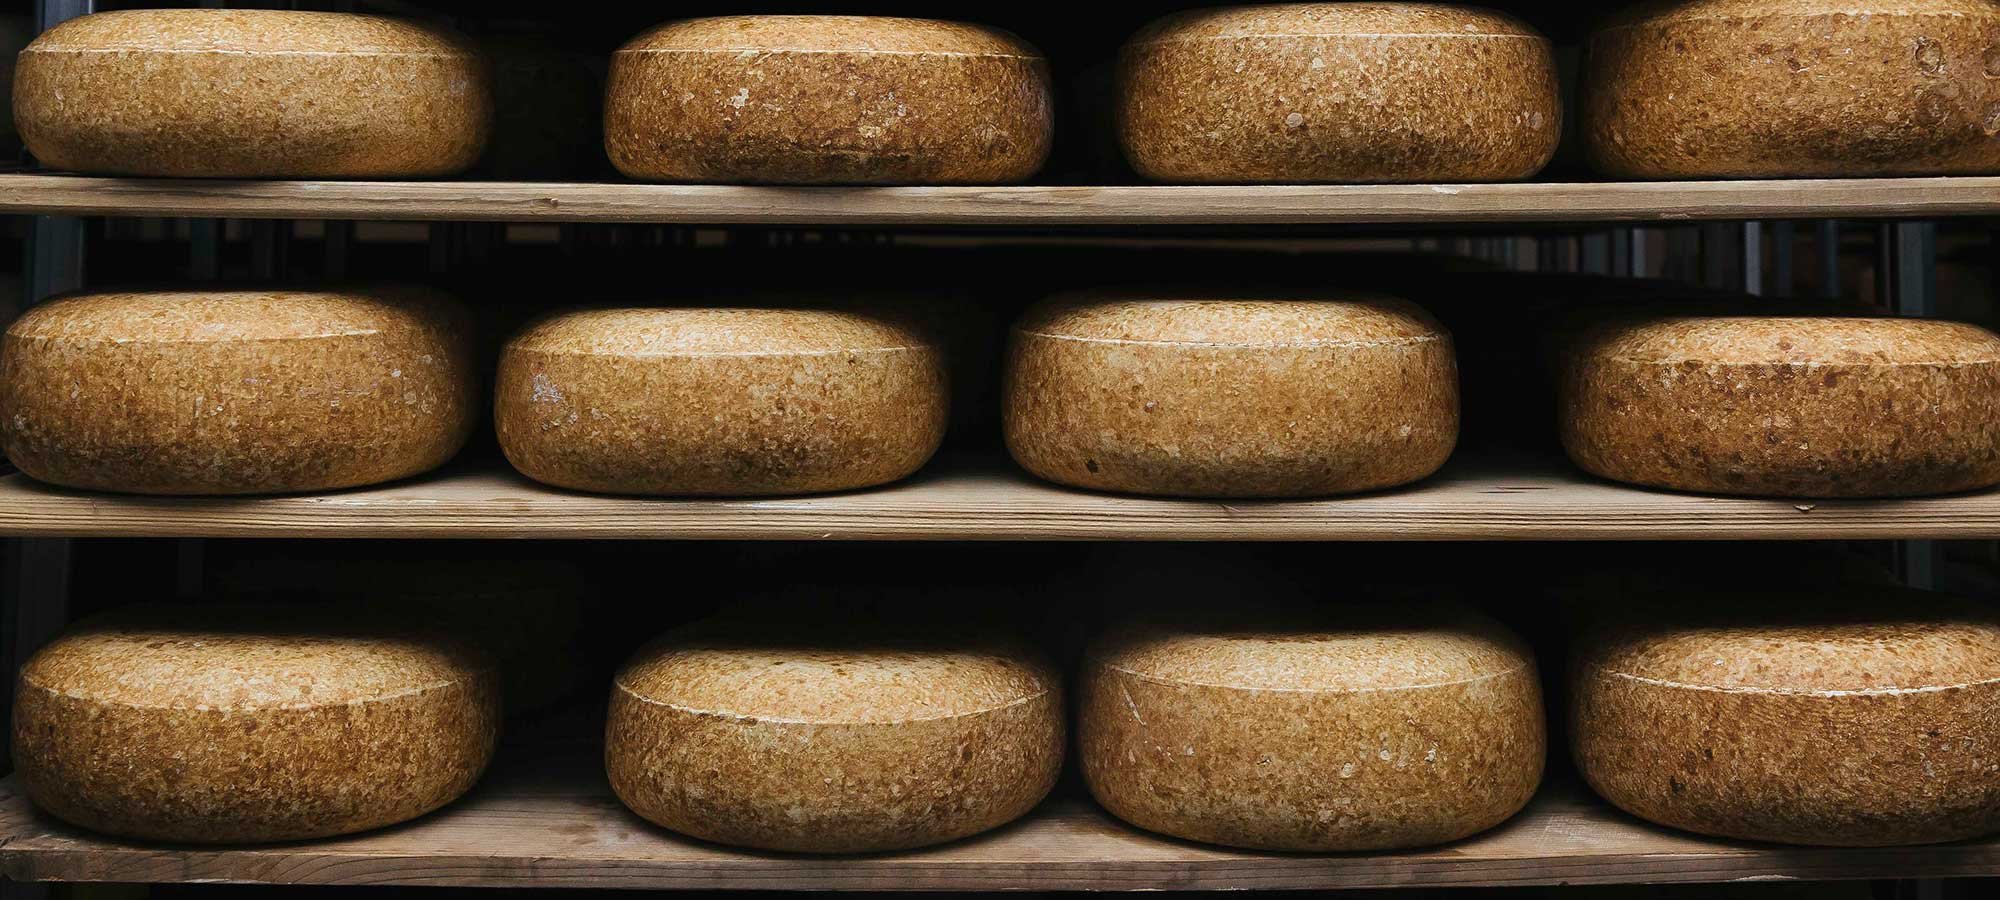 The Fresh Face of Wisconsin’s Artisan Cheese